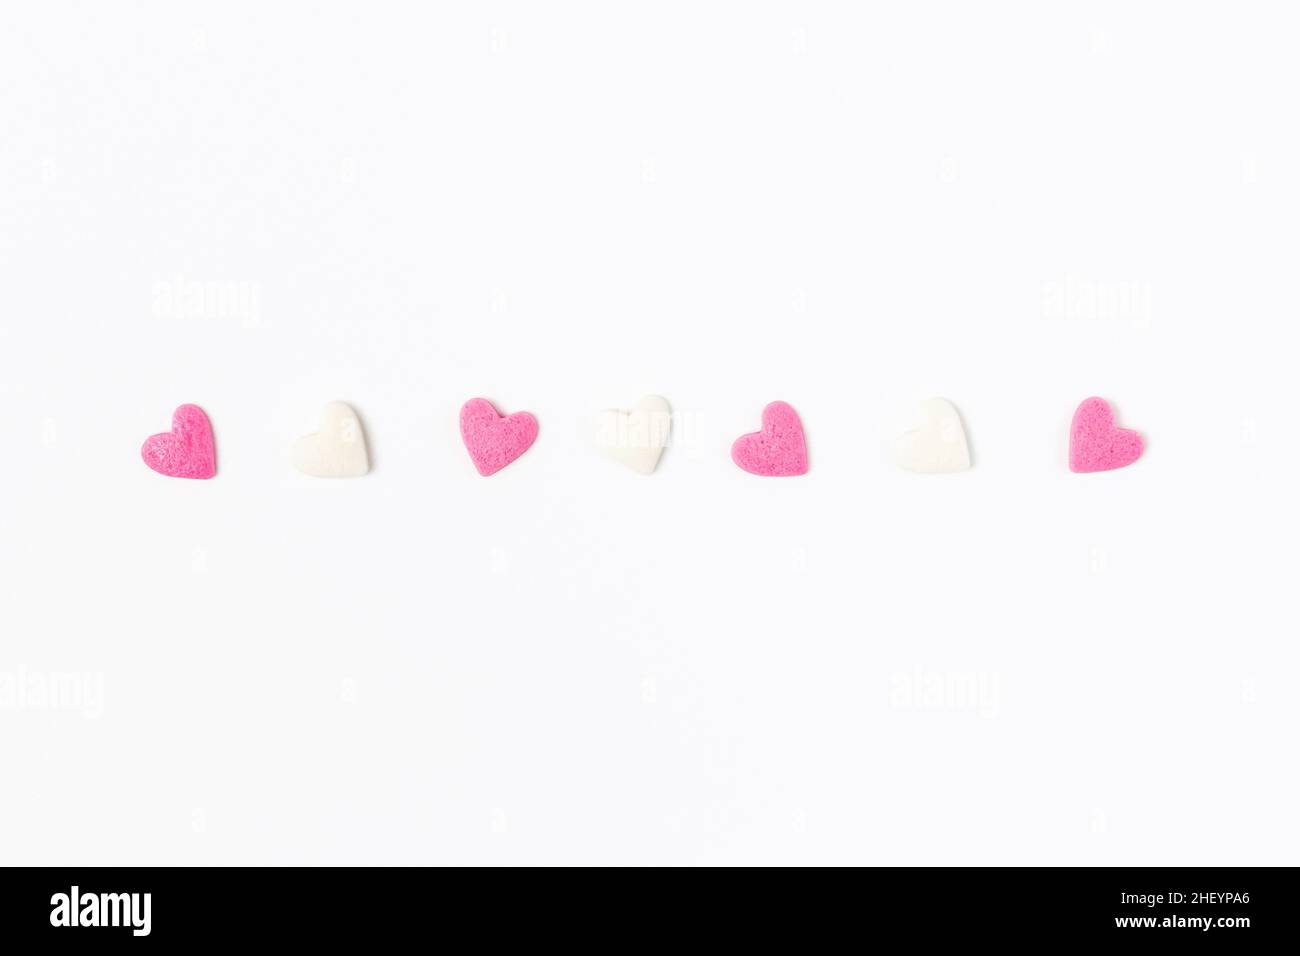 Pink and white heart-shaped sugar candies on white background, minimalistic saint valentine`s day greeting card Stock Photo